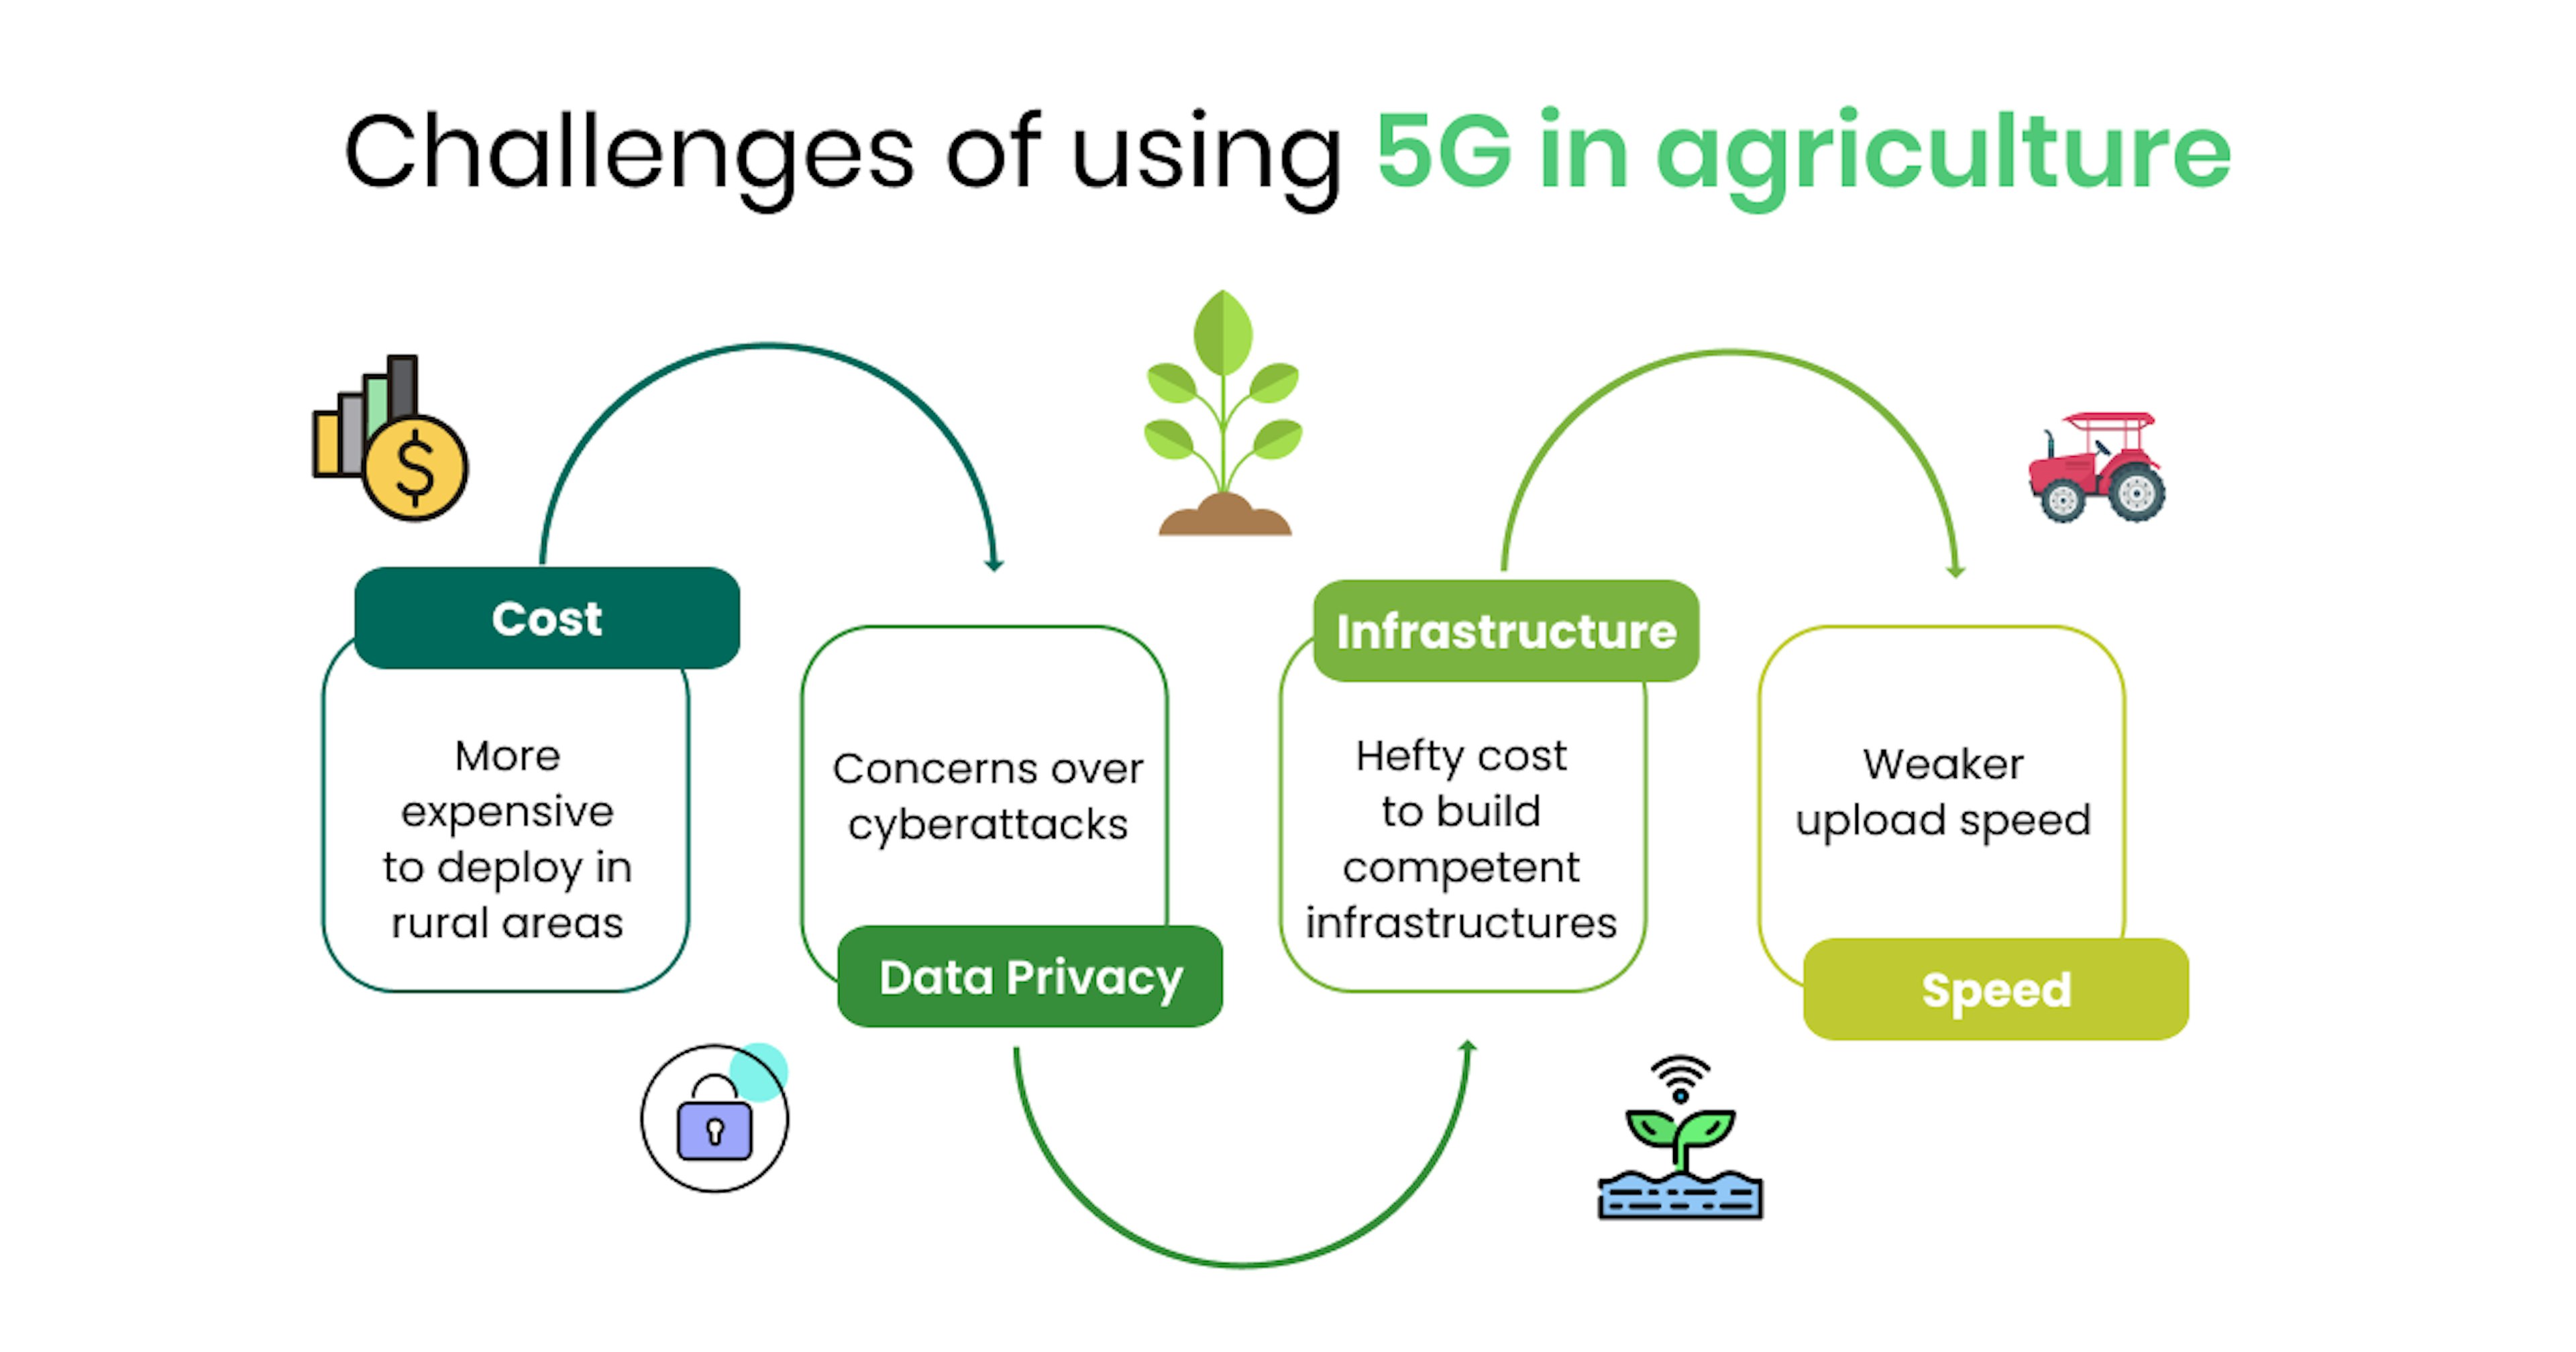 Challenges of using 5G in agriculture